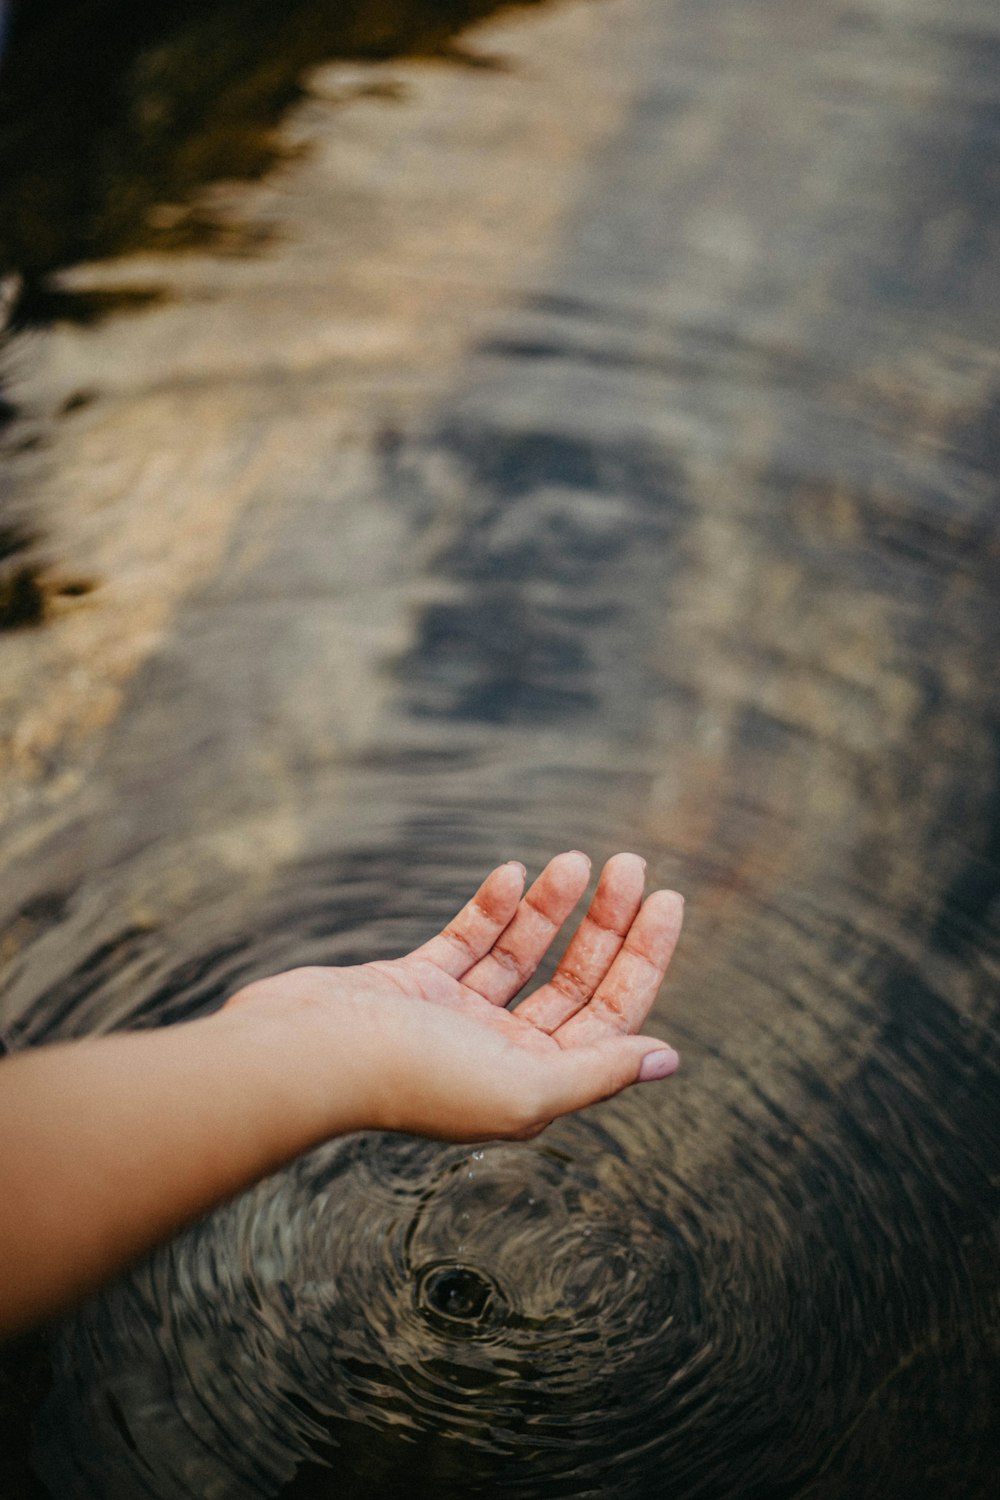 a person's hand reaching out into a body of water